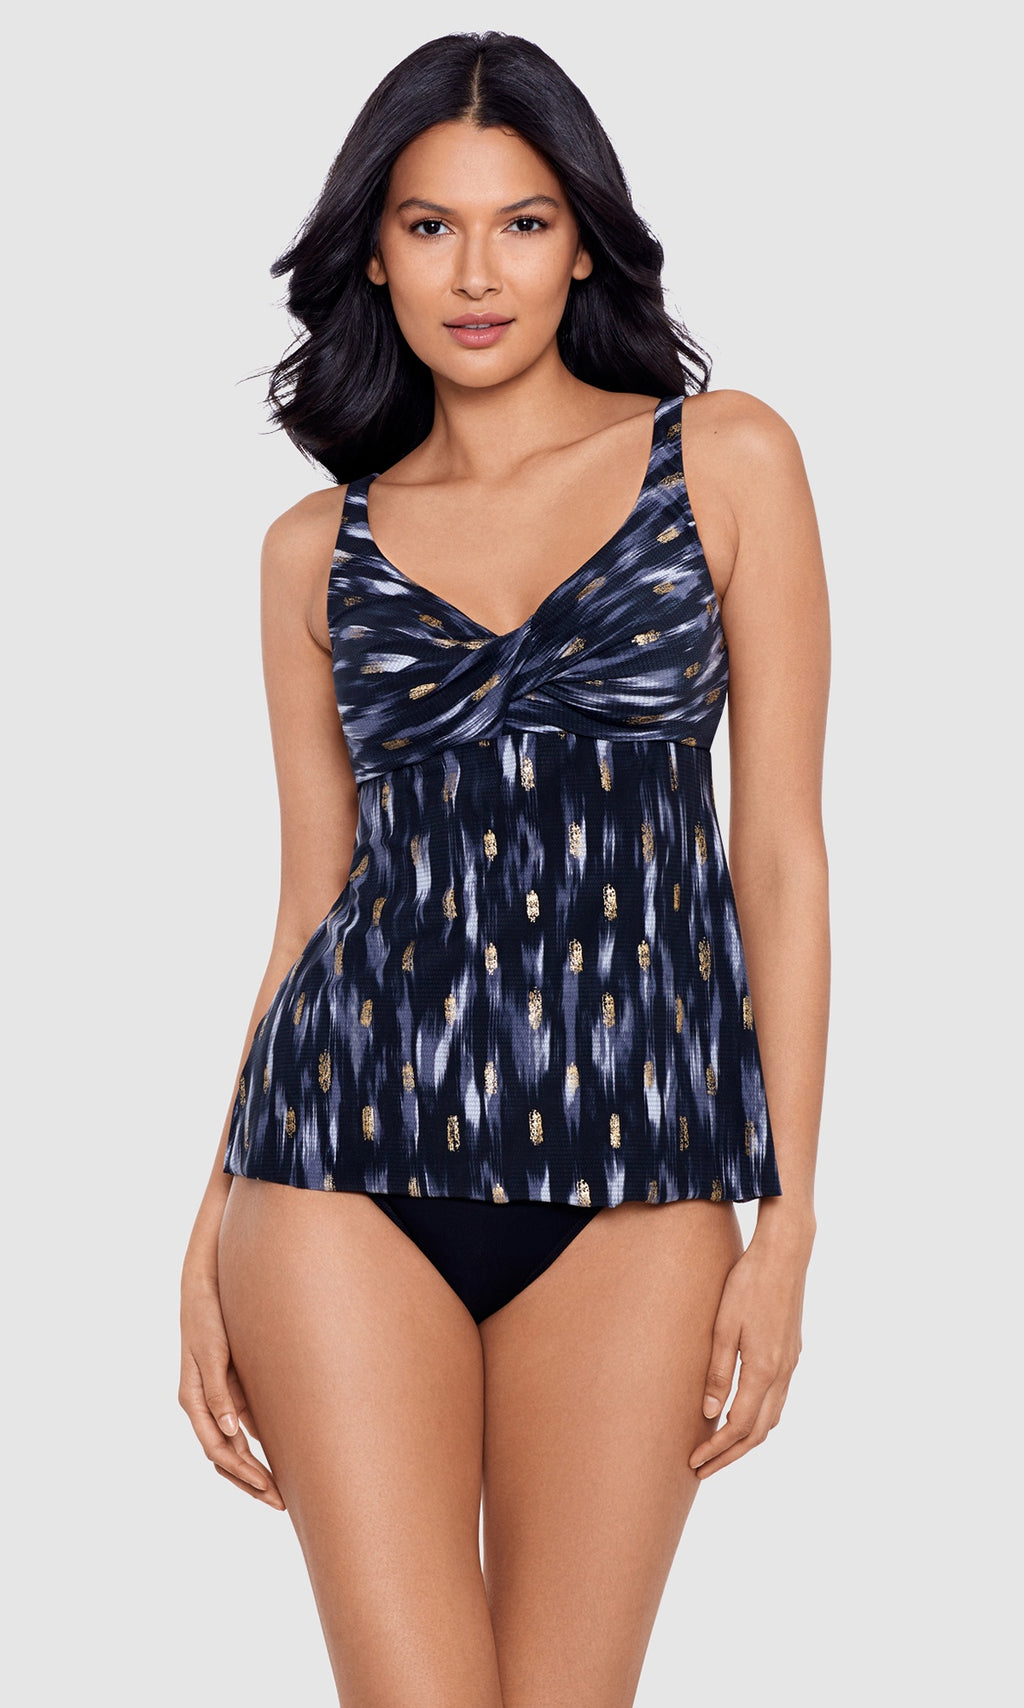 Bronze Reign Ayla Tankini Top, Fits A Cup to C Cup